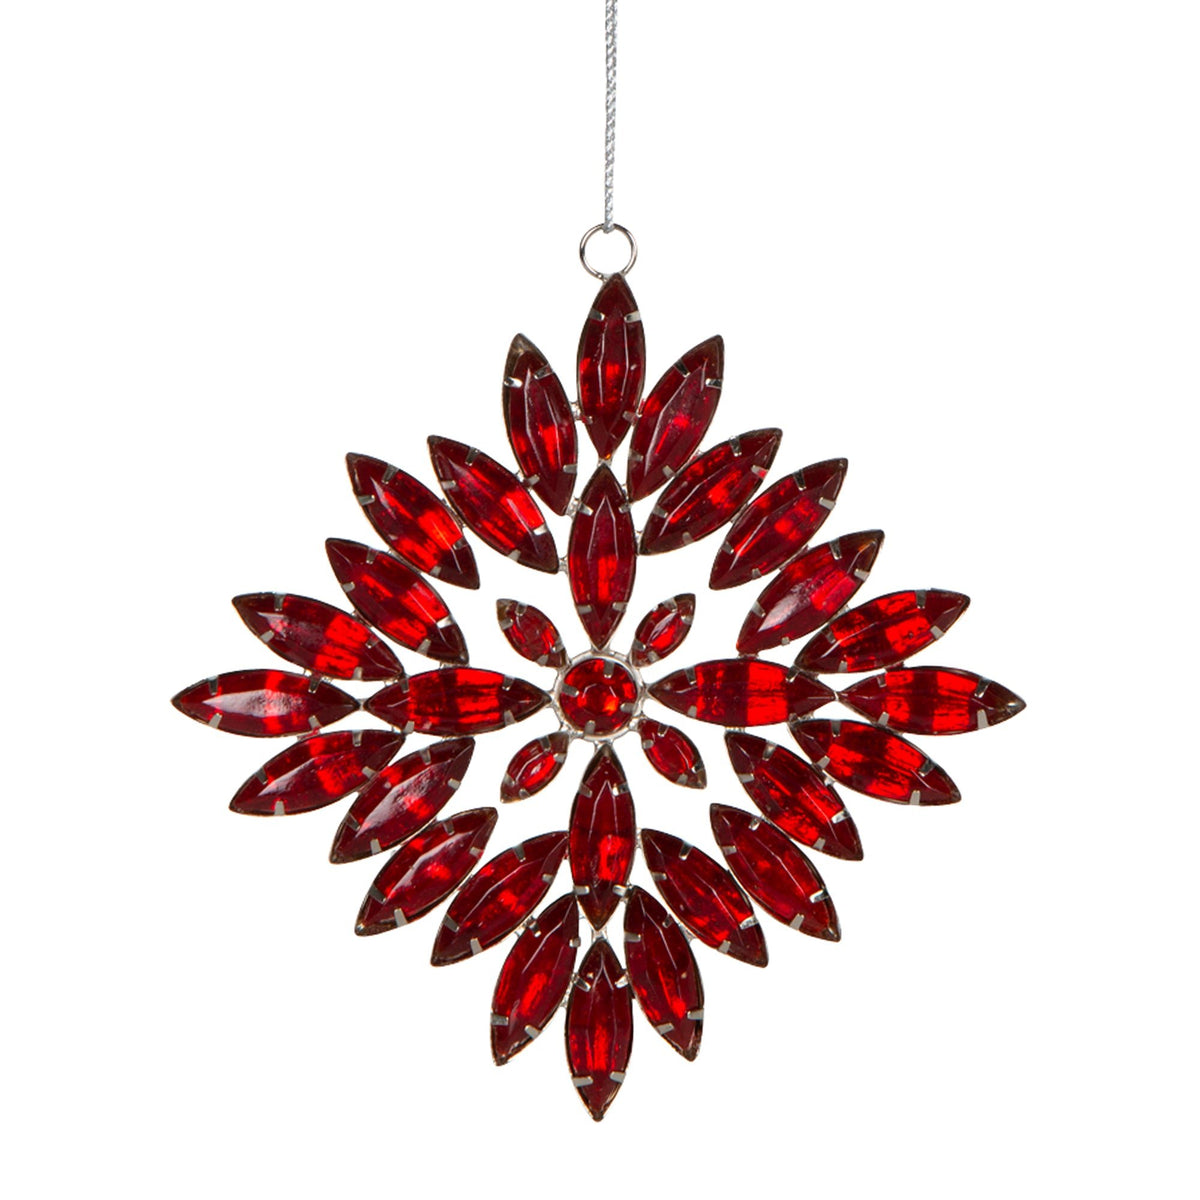 Red Jewel Ornament - My Christmas